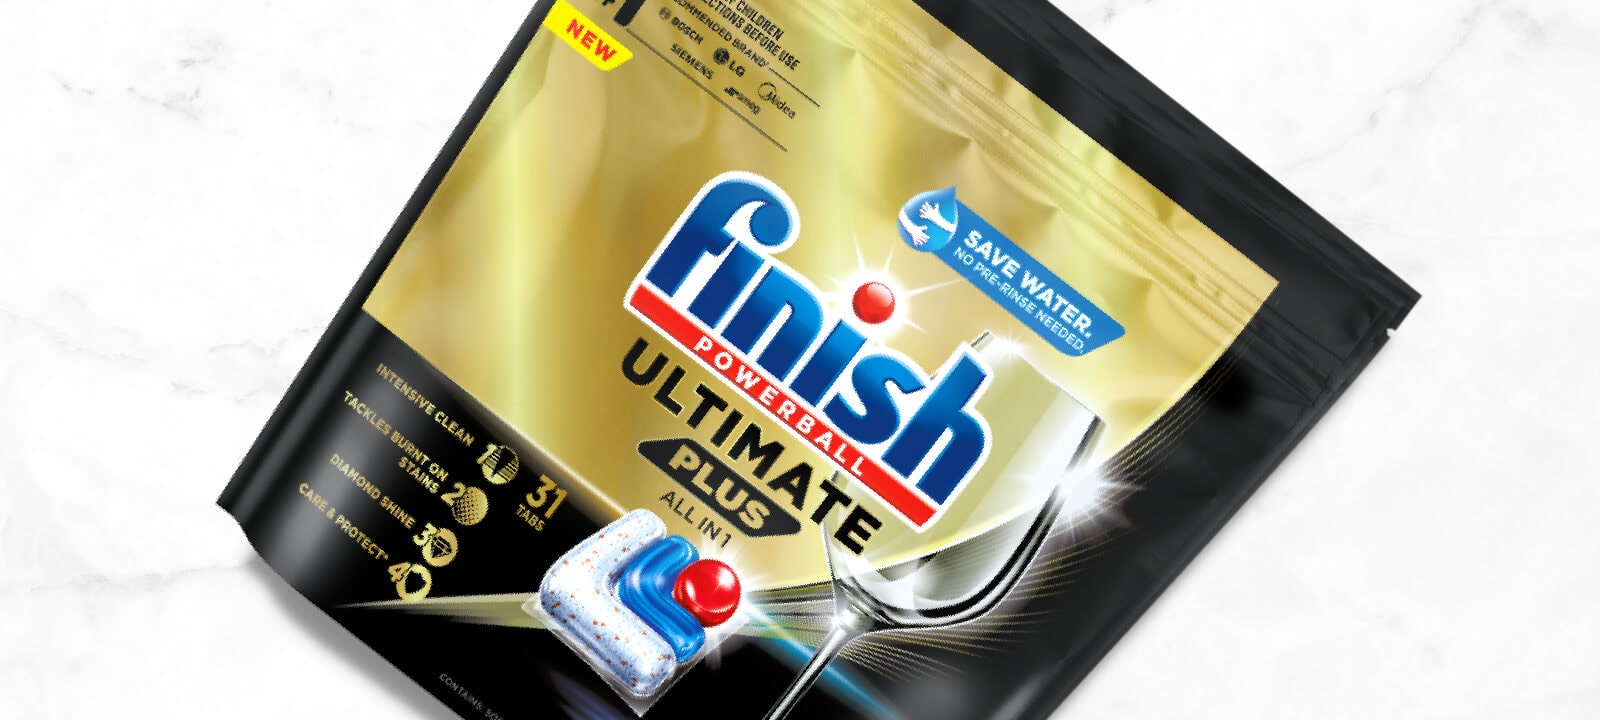 Introducing the NEW Finish Ultimate Plus! Our latest innovation in  dishwashing tablets, Finish Ultimate Plus, boasts CYCLESYNC technolo